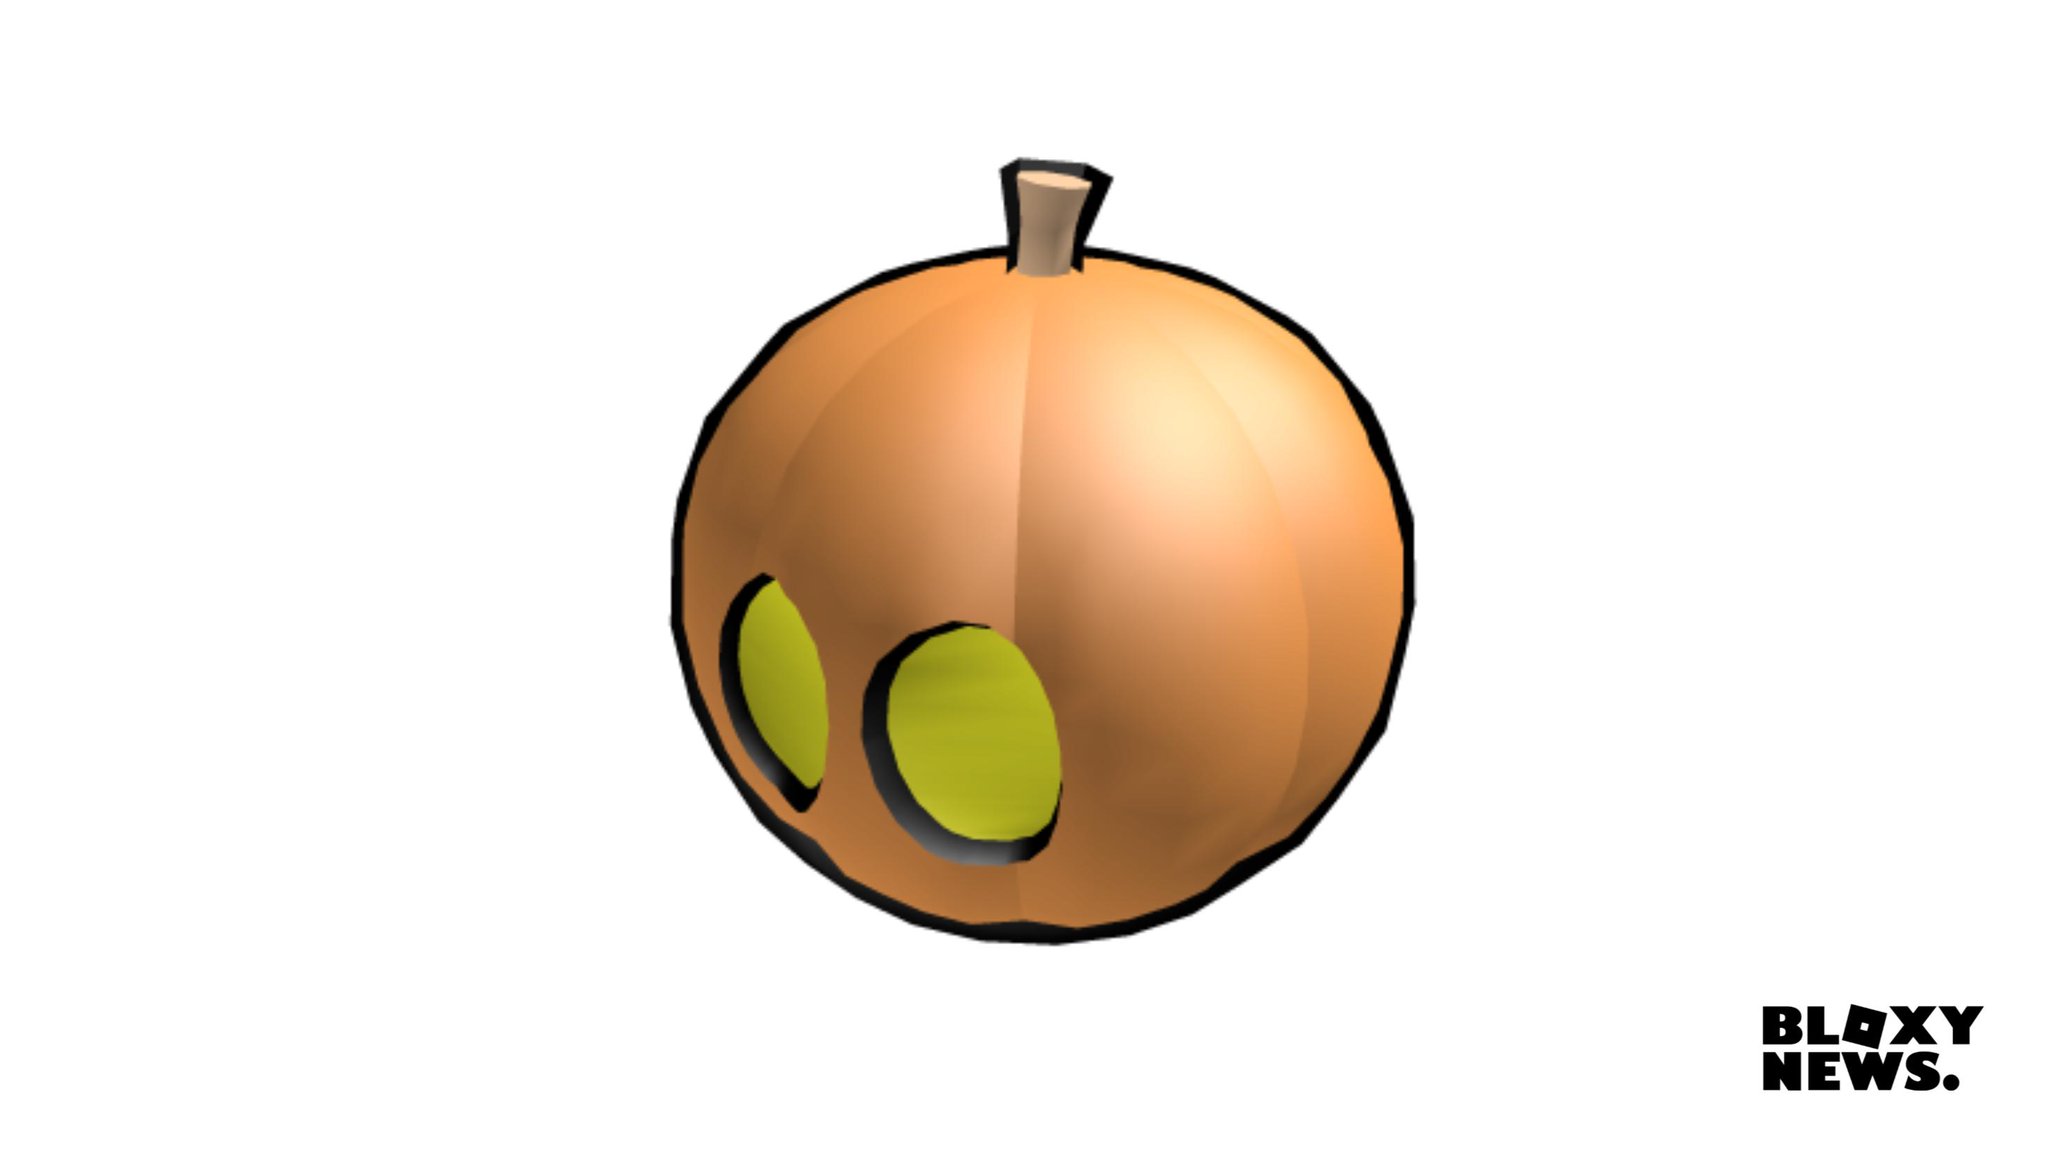 Bloxy News On Twitter He S A Witchery Student From Oddport Academy Pumpkin Kid By Maplestick1 Is Now The 1 Bestselling Ugc User Generated Content Hat On Roblox Pick Him Up - hank hat roblox hats roblox hank